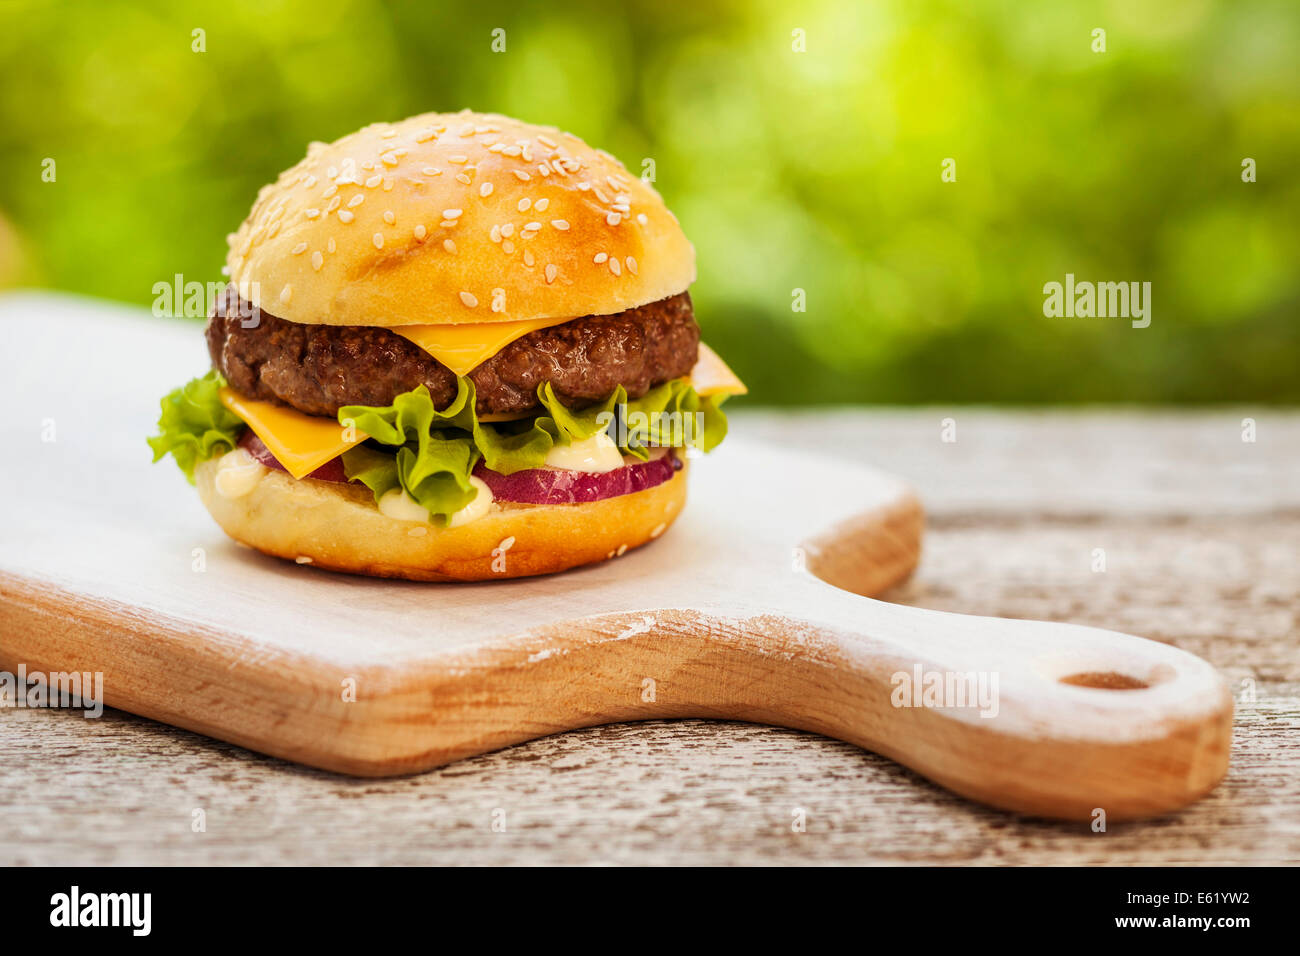 Tasty burger with cheese, lettuce, onion and tomatoes served outdoor on a wooden table Stock Photo